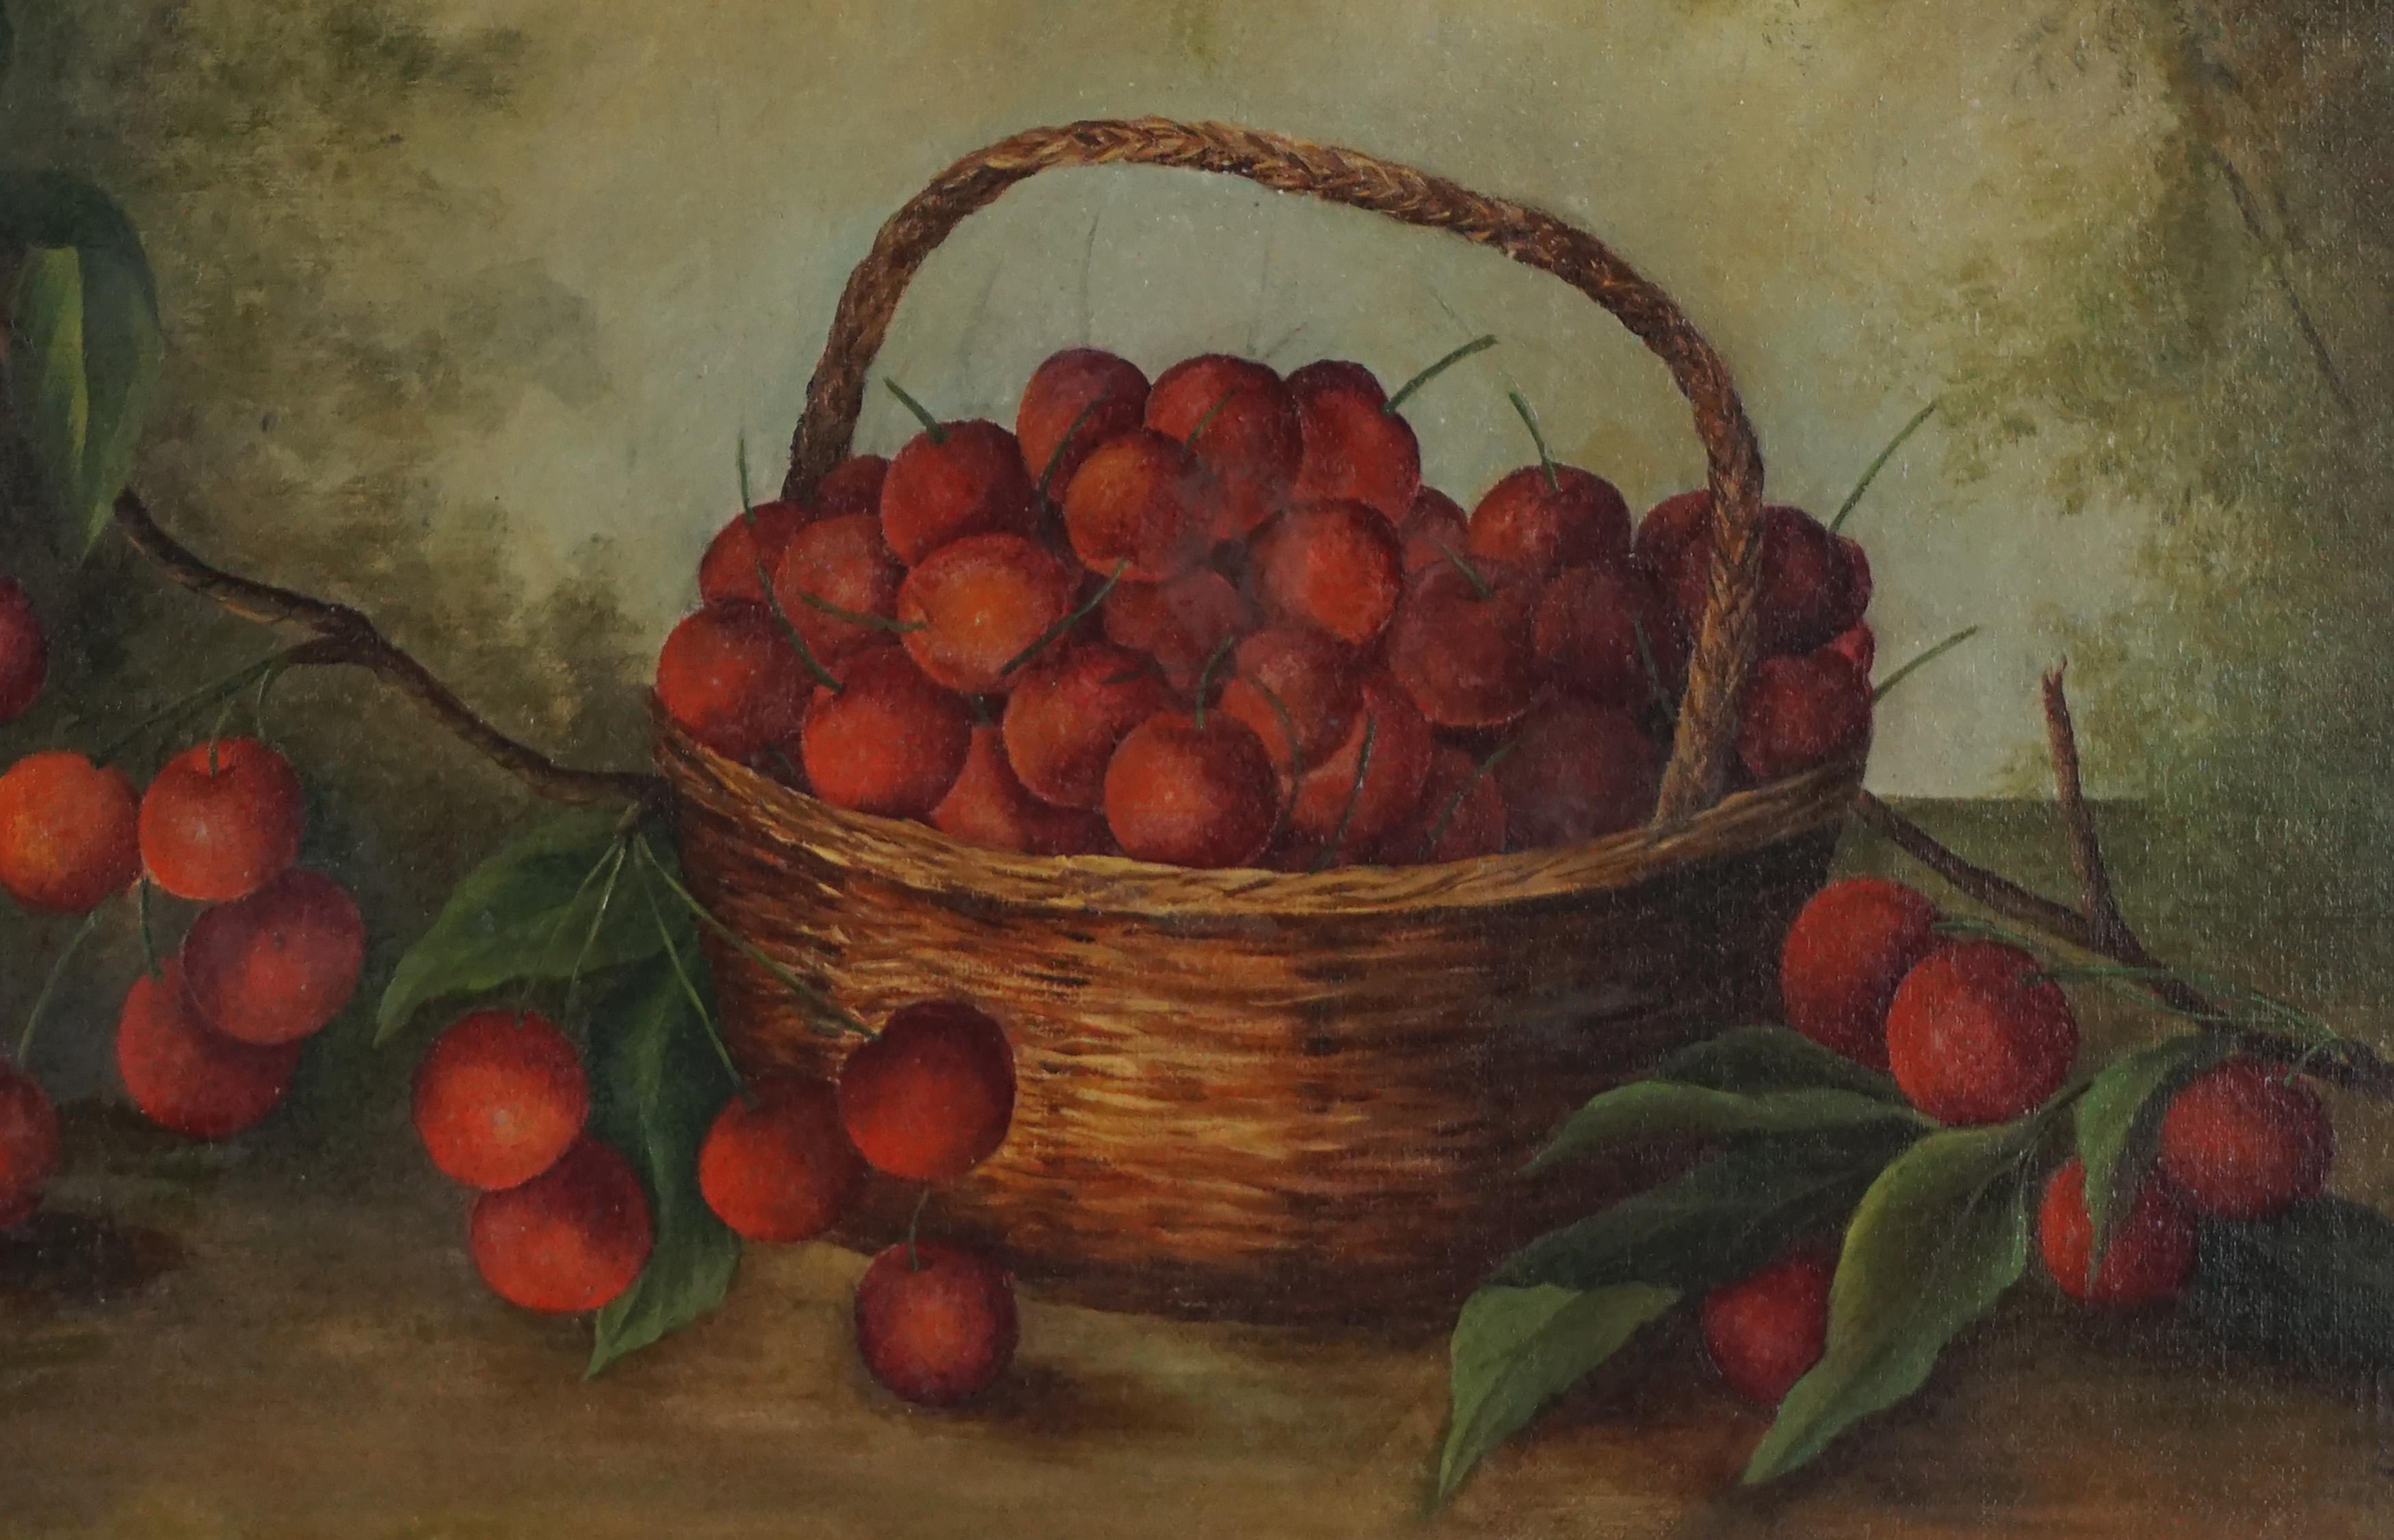 Original Antique Still Life Oil Painting Basket of Ripe Cherries

Basket of ripe cherries still life oil painting by C. S. Wolfe (American, 19th/20th Century), 1901. Cherries attached to branch creates an interesting “frame” for basket of just